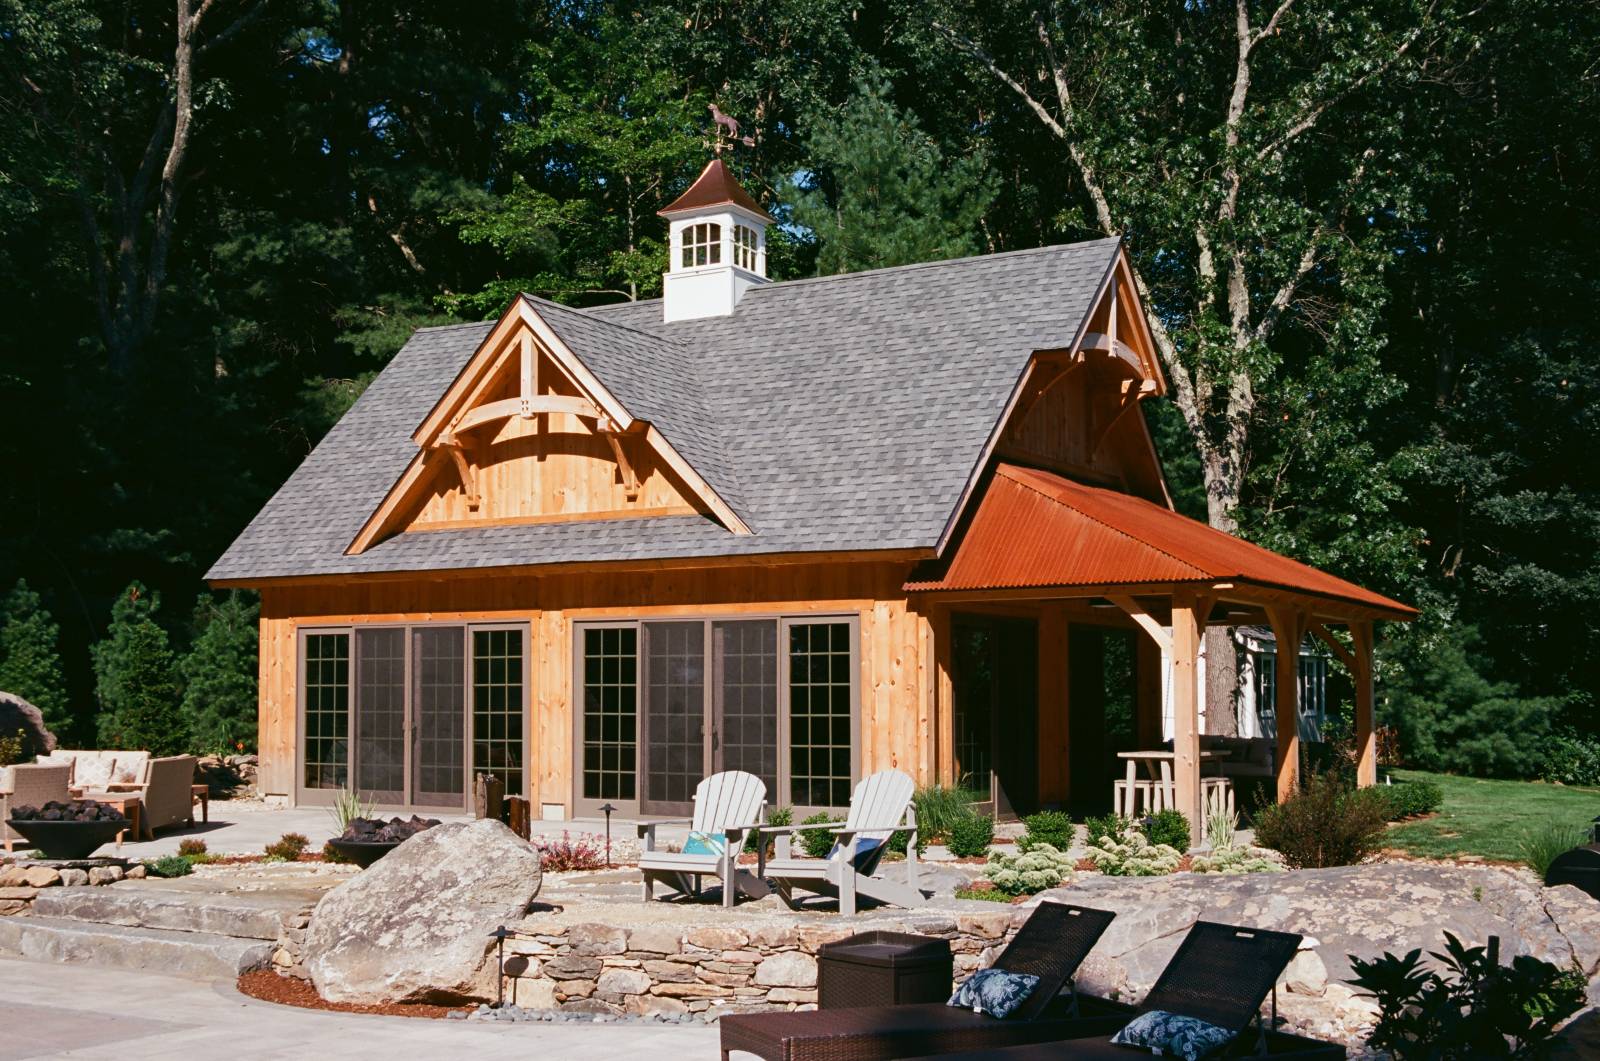 Details of the Pool House: Gable Dormer with Timber Frame Accent • Turkey Tail Peaks with Timber Accents • 10' x 24' Open Hip Roof Lean-To Overhang • Full View Glass Sliding Doors